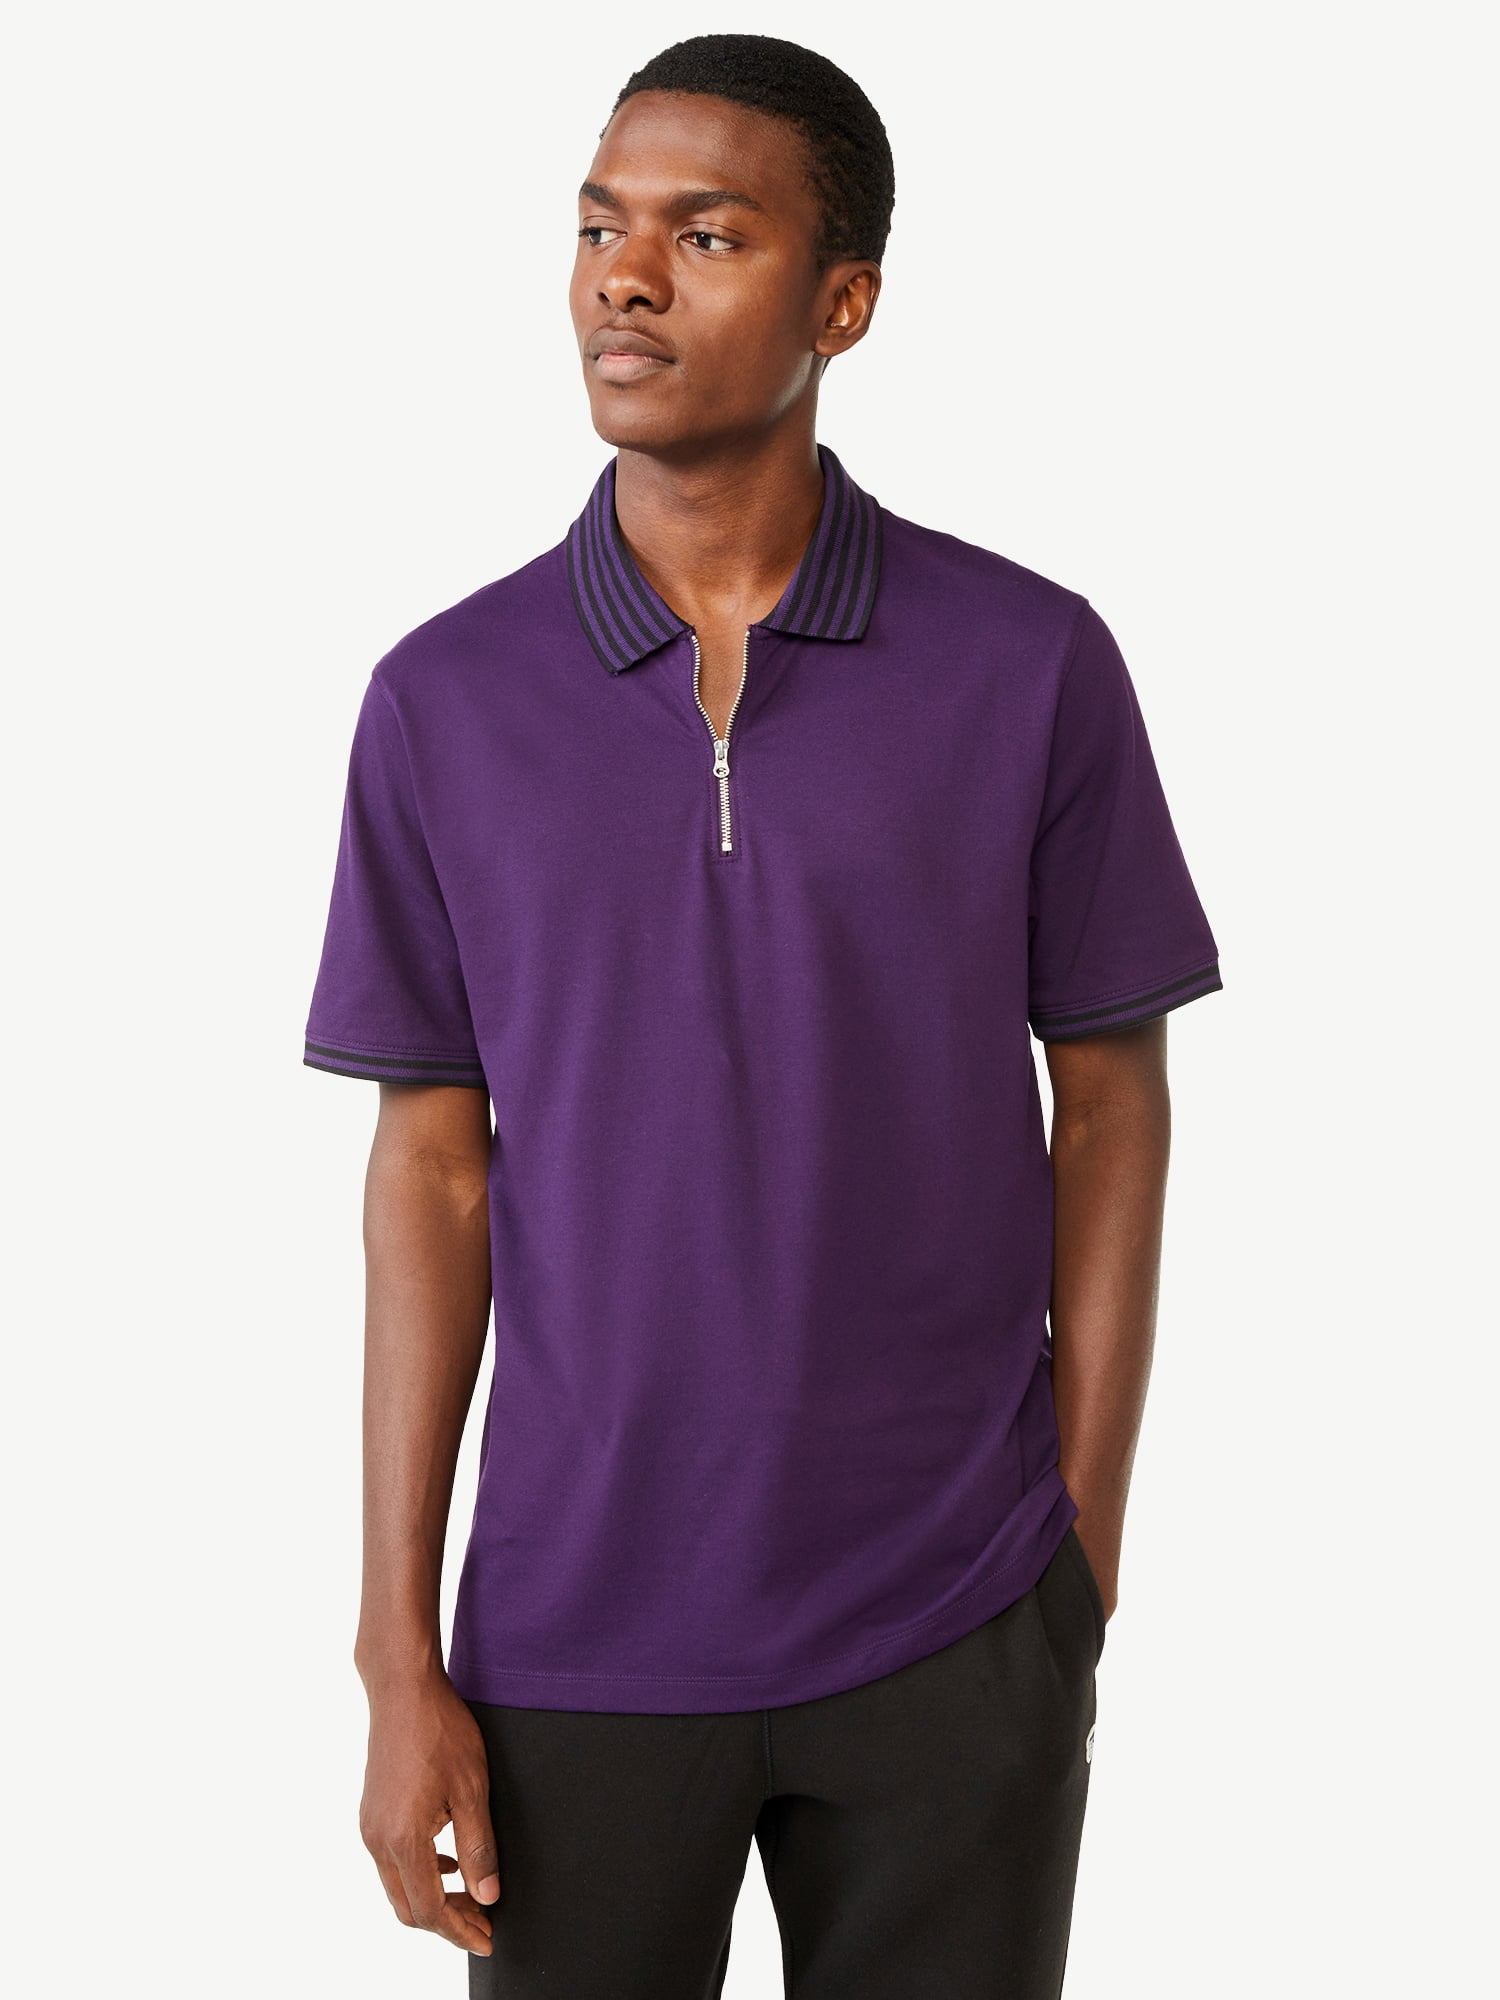 Free Assembly Men's Tipped Stretch Pique Zip Polo Shirt with Short ...